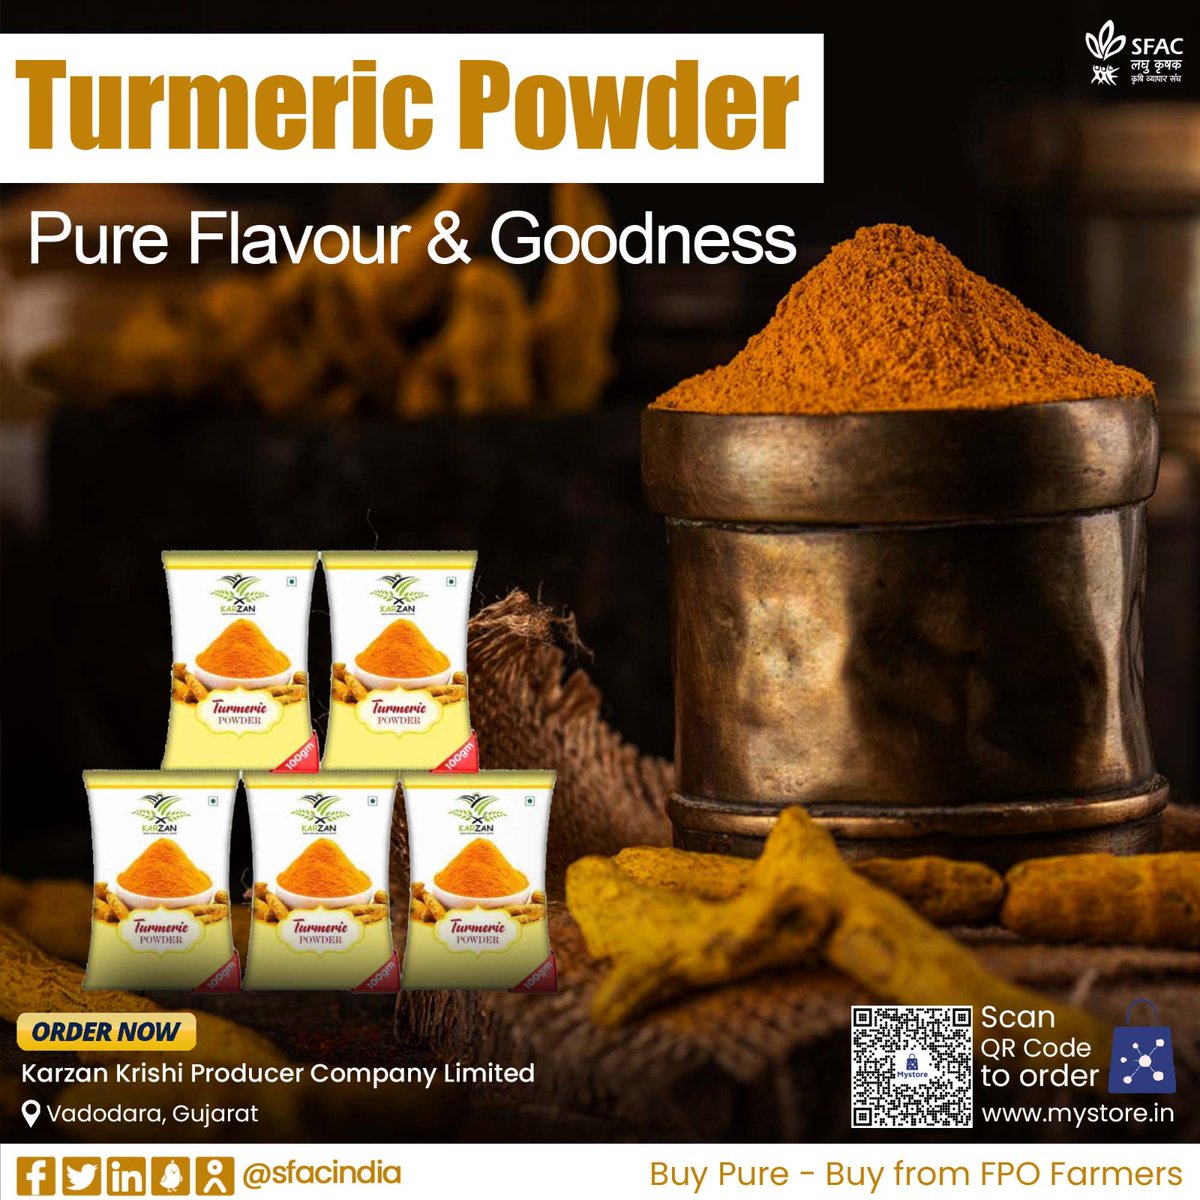 Experience the rich & vibrant flavour of pure turmeric powder, sourced from high-quality roots. No additives & color, only goodness of natural turmeric.

Buy straight from FPO farmers👇

mystore.in/en/product/tur…

😋

#VocalForLocal #healthychoices #healthyeating #healthyhabits